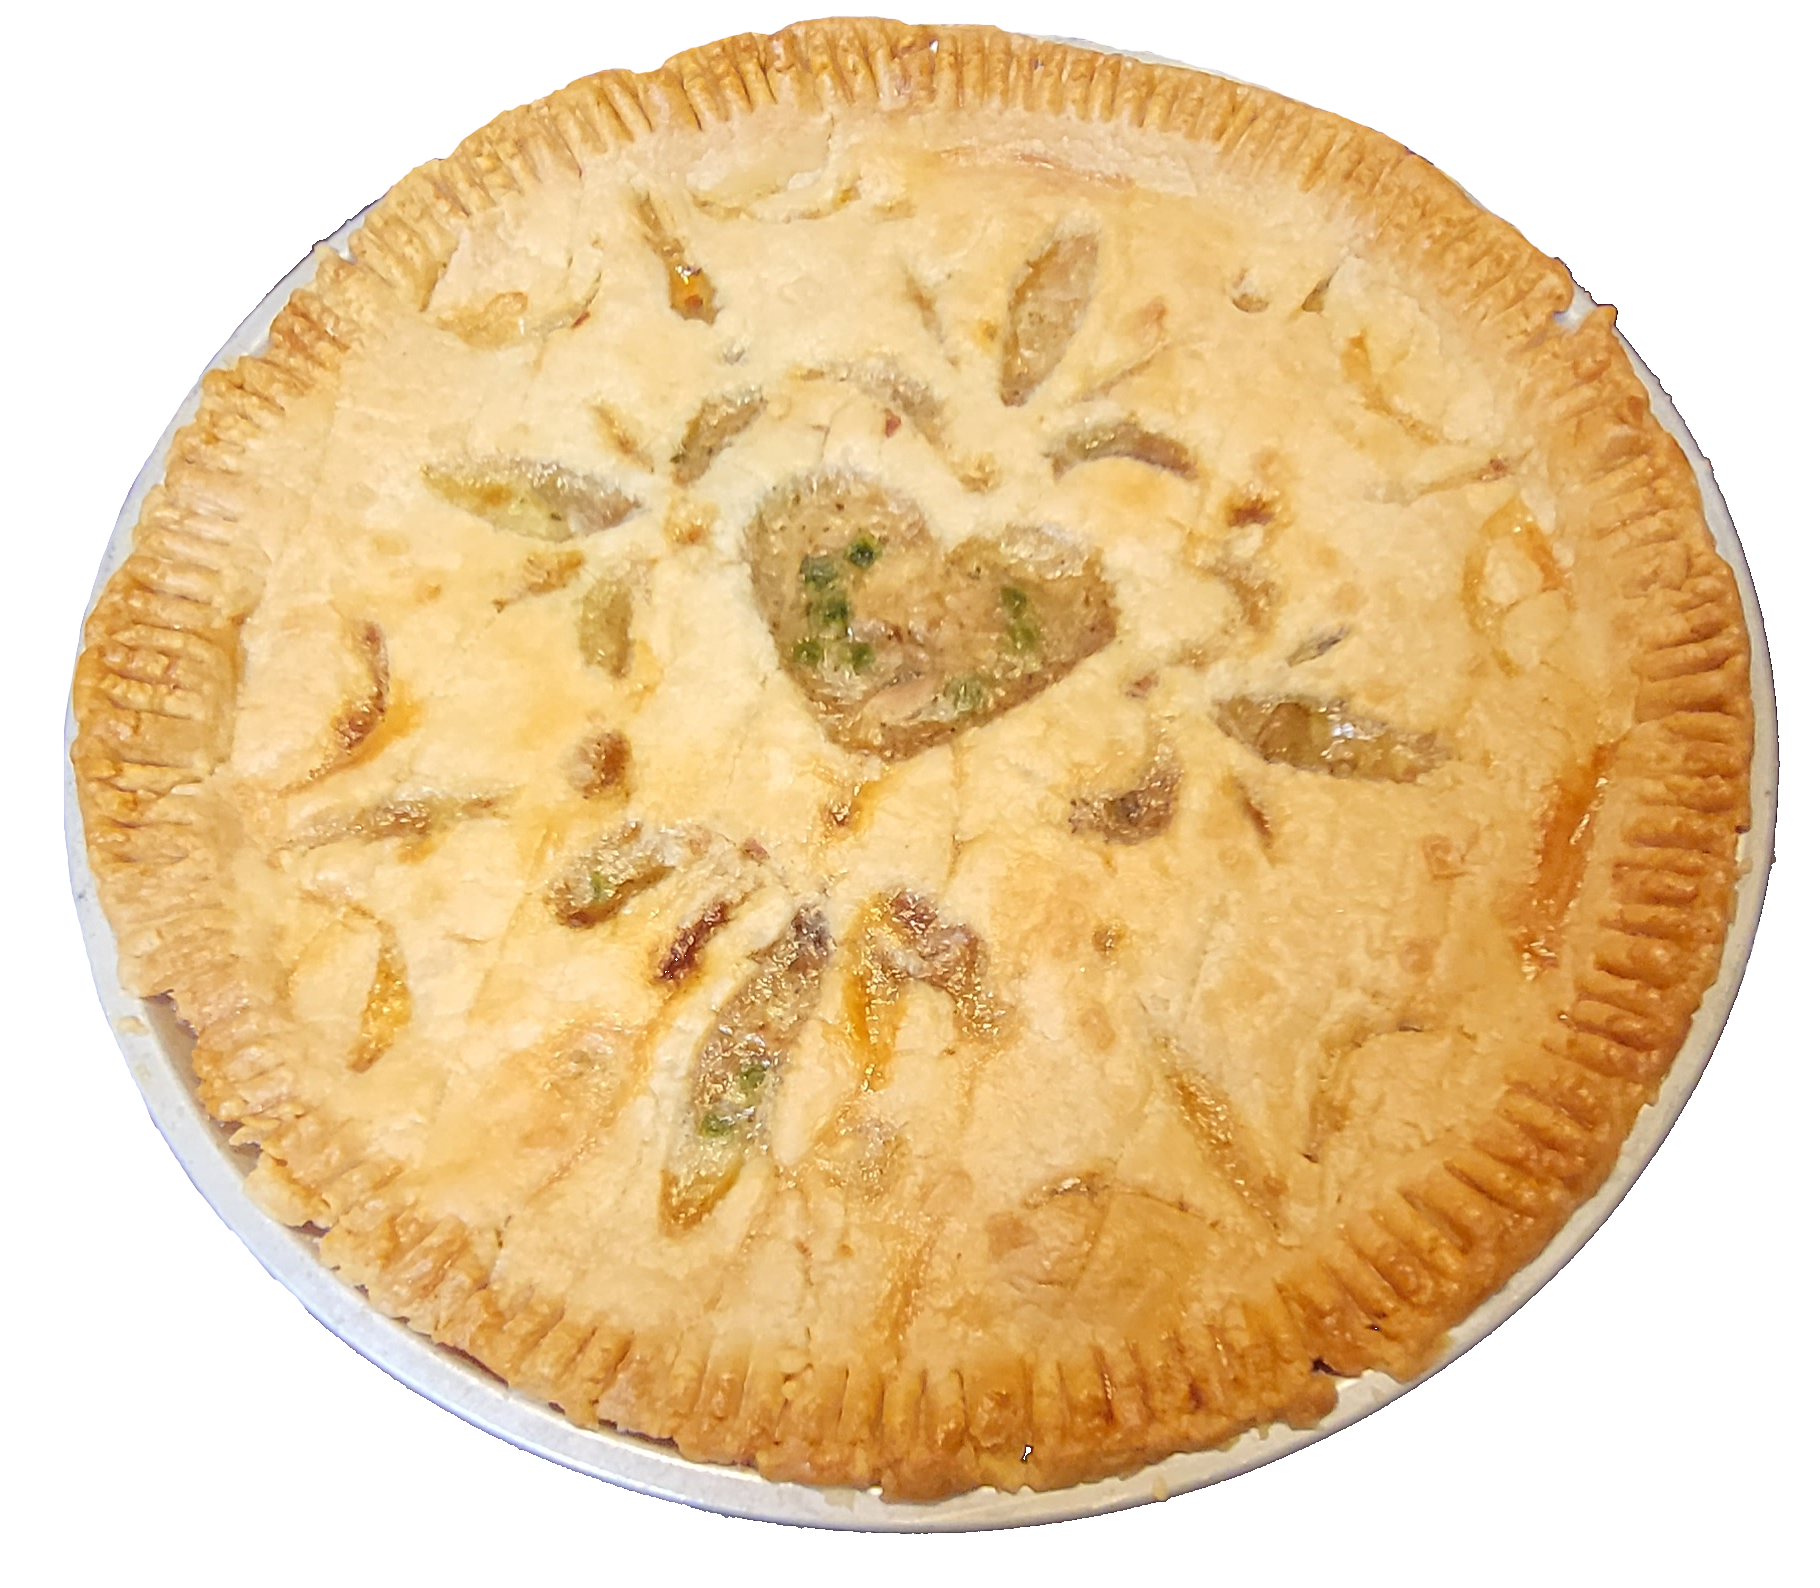 Picture of the chicken pot pie